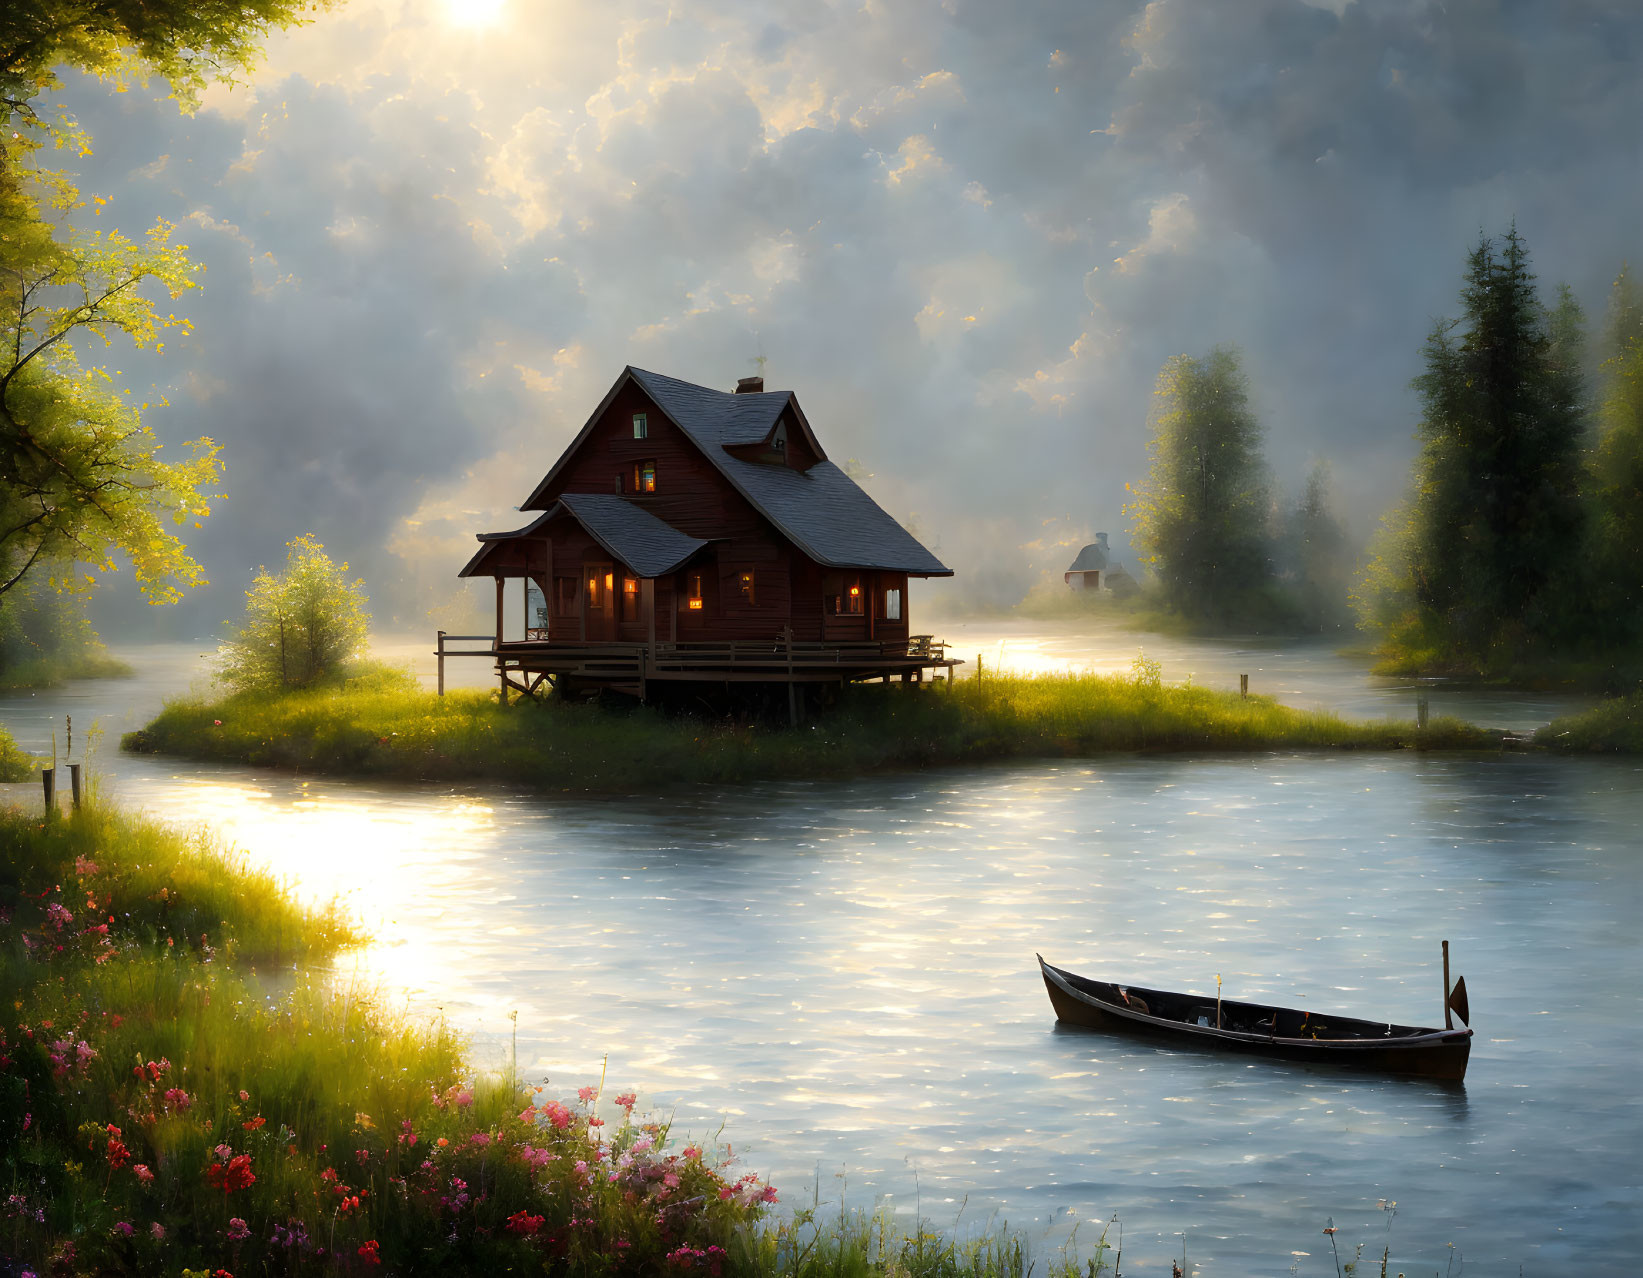 Tranquil lakeside view with wooden house, lush greenery, and floating boat